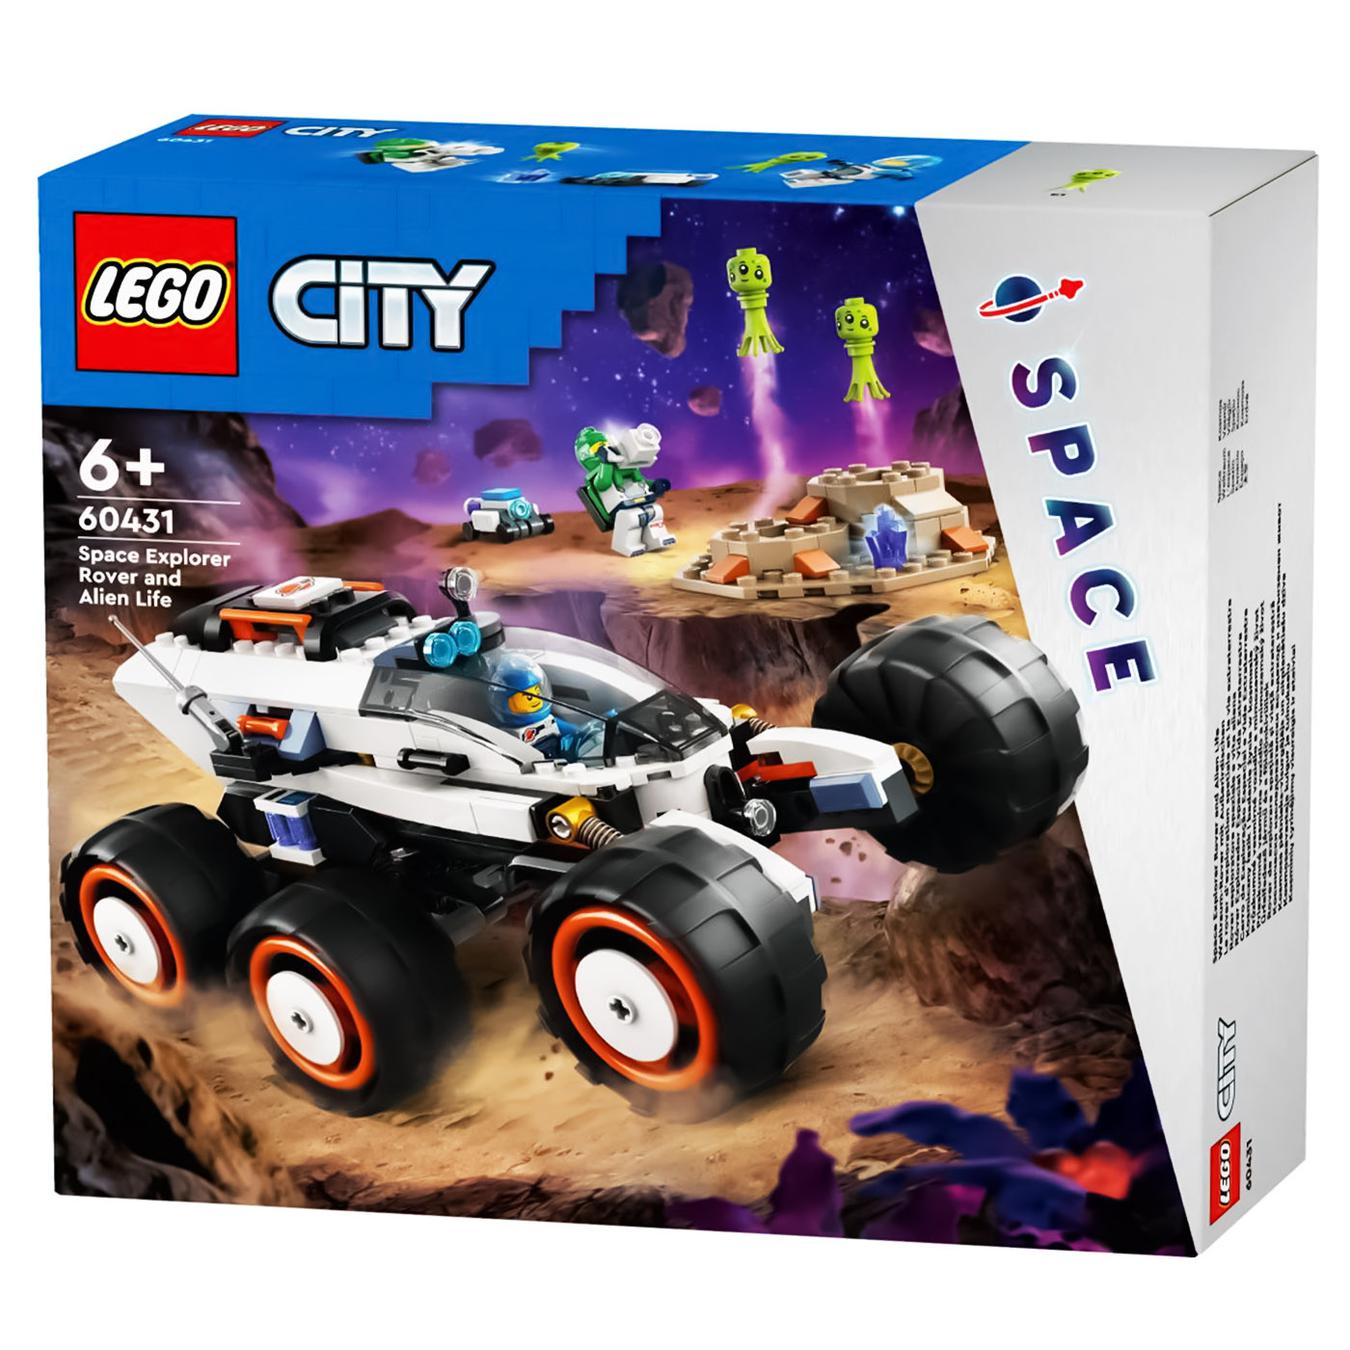 Constructor LEGO City 60431 Space research rover and alien life